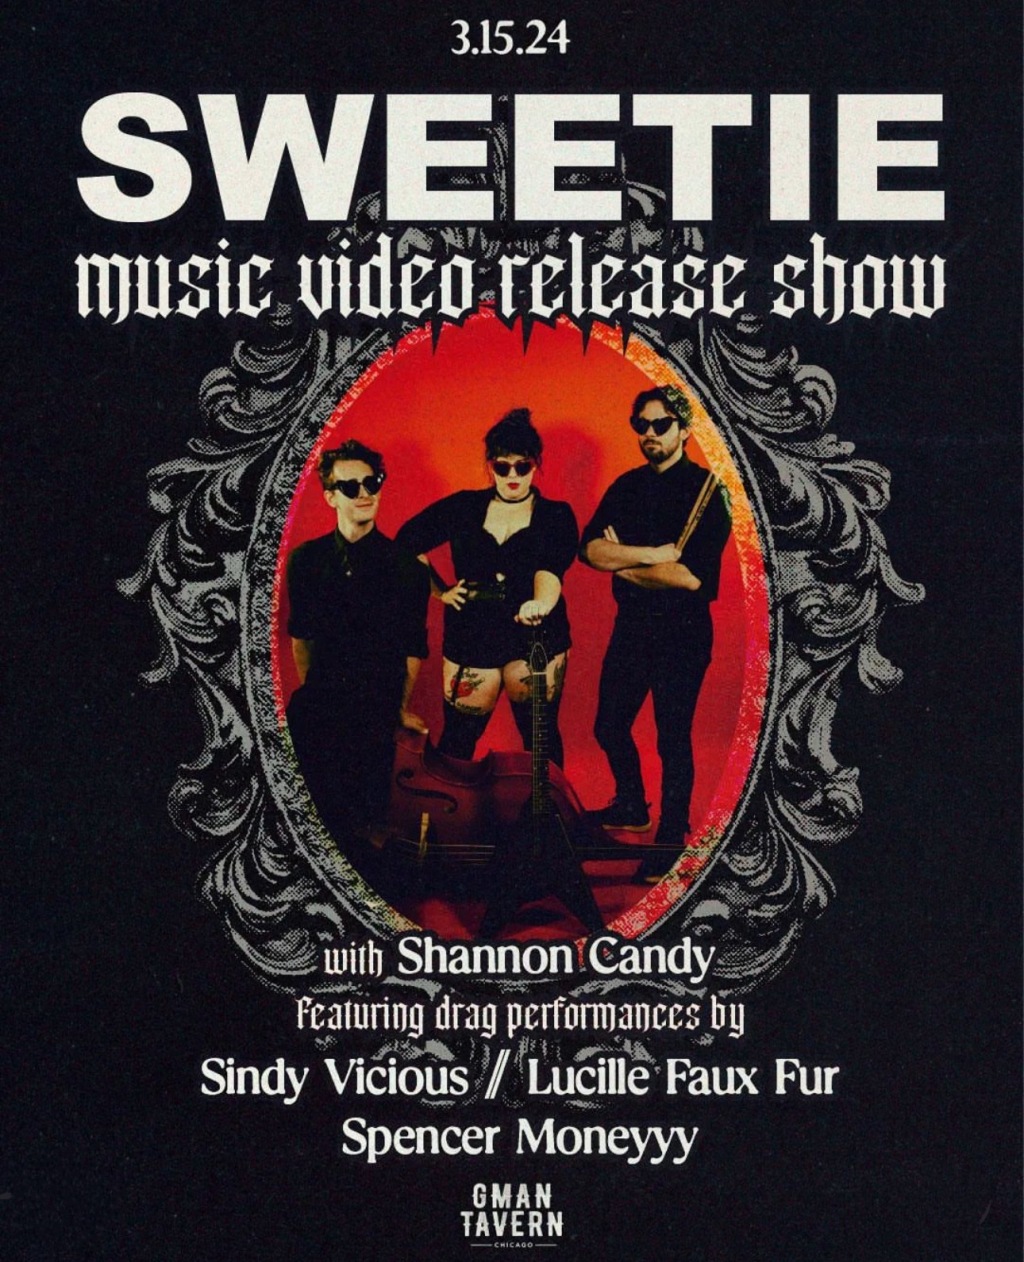 Sweetie Blends Old Hollywood Glamor with Punk Edge in “Showgirl”